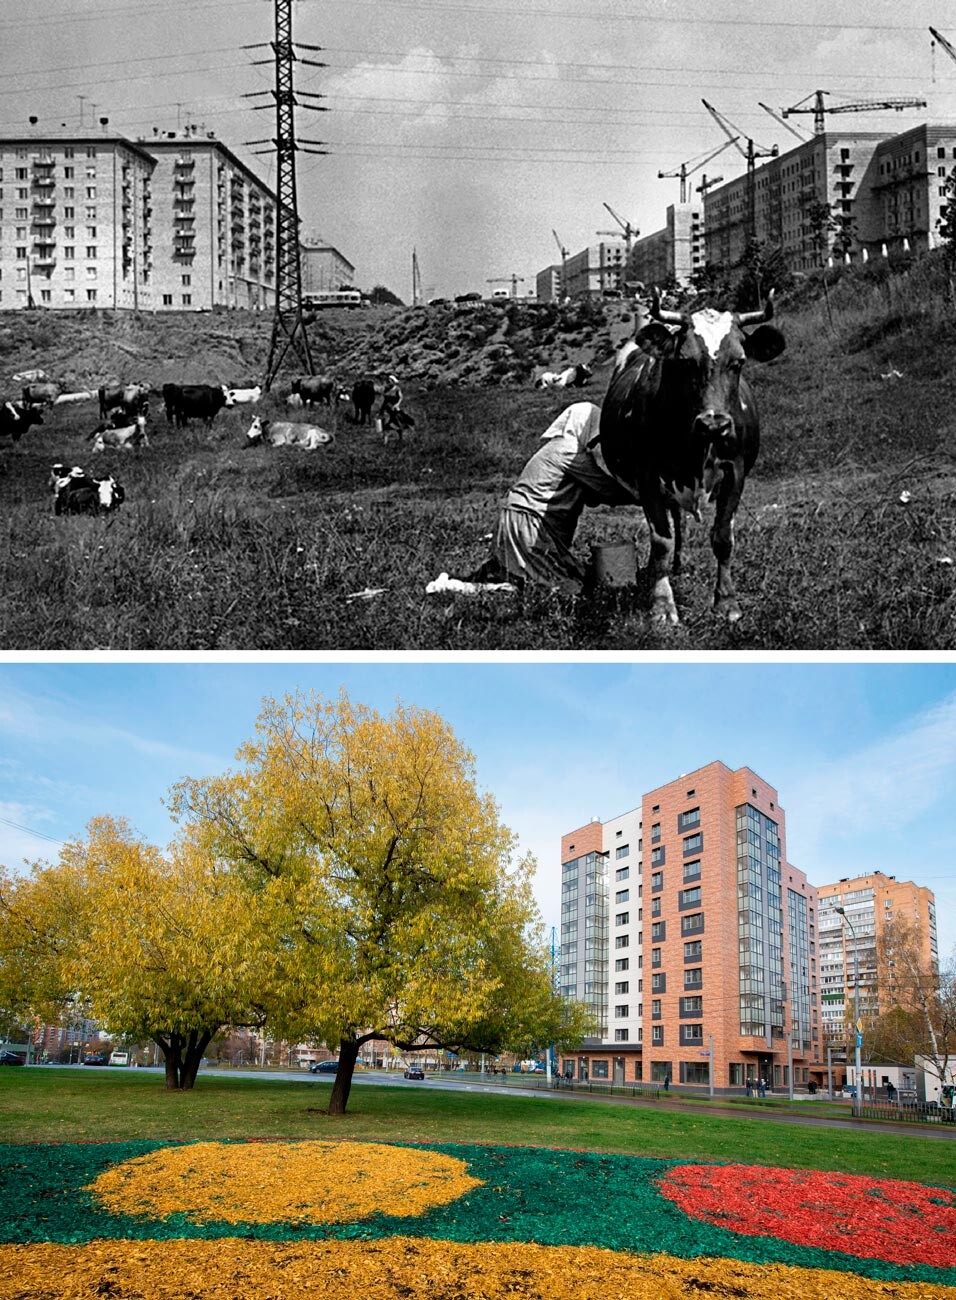 Above: The village of Cheryomushki, 1954. Below: A new house in Cheryomushki, built on the place of old panel houses, 2020.